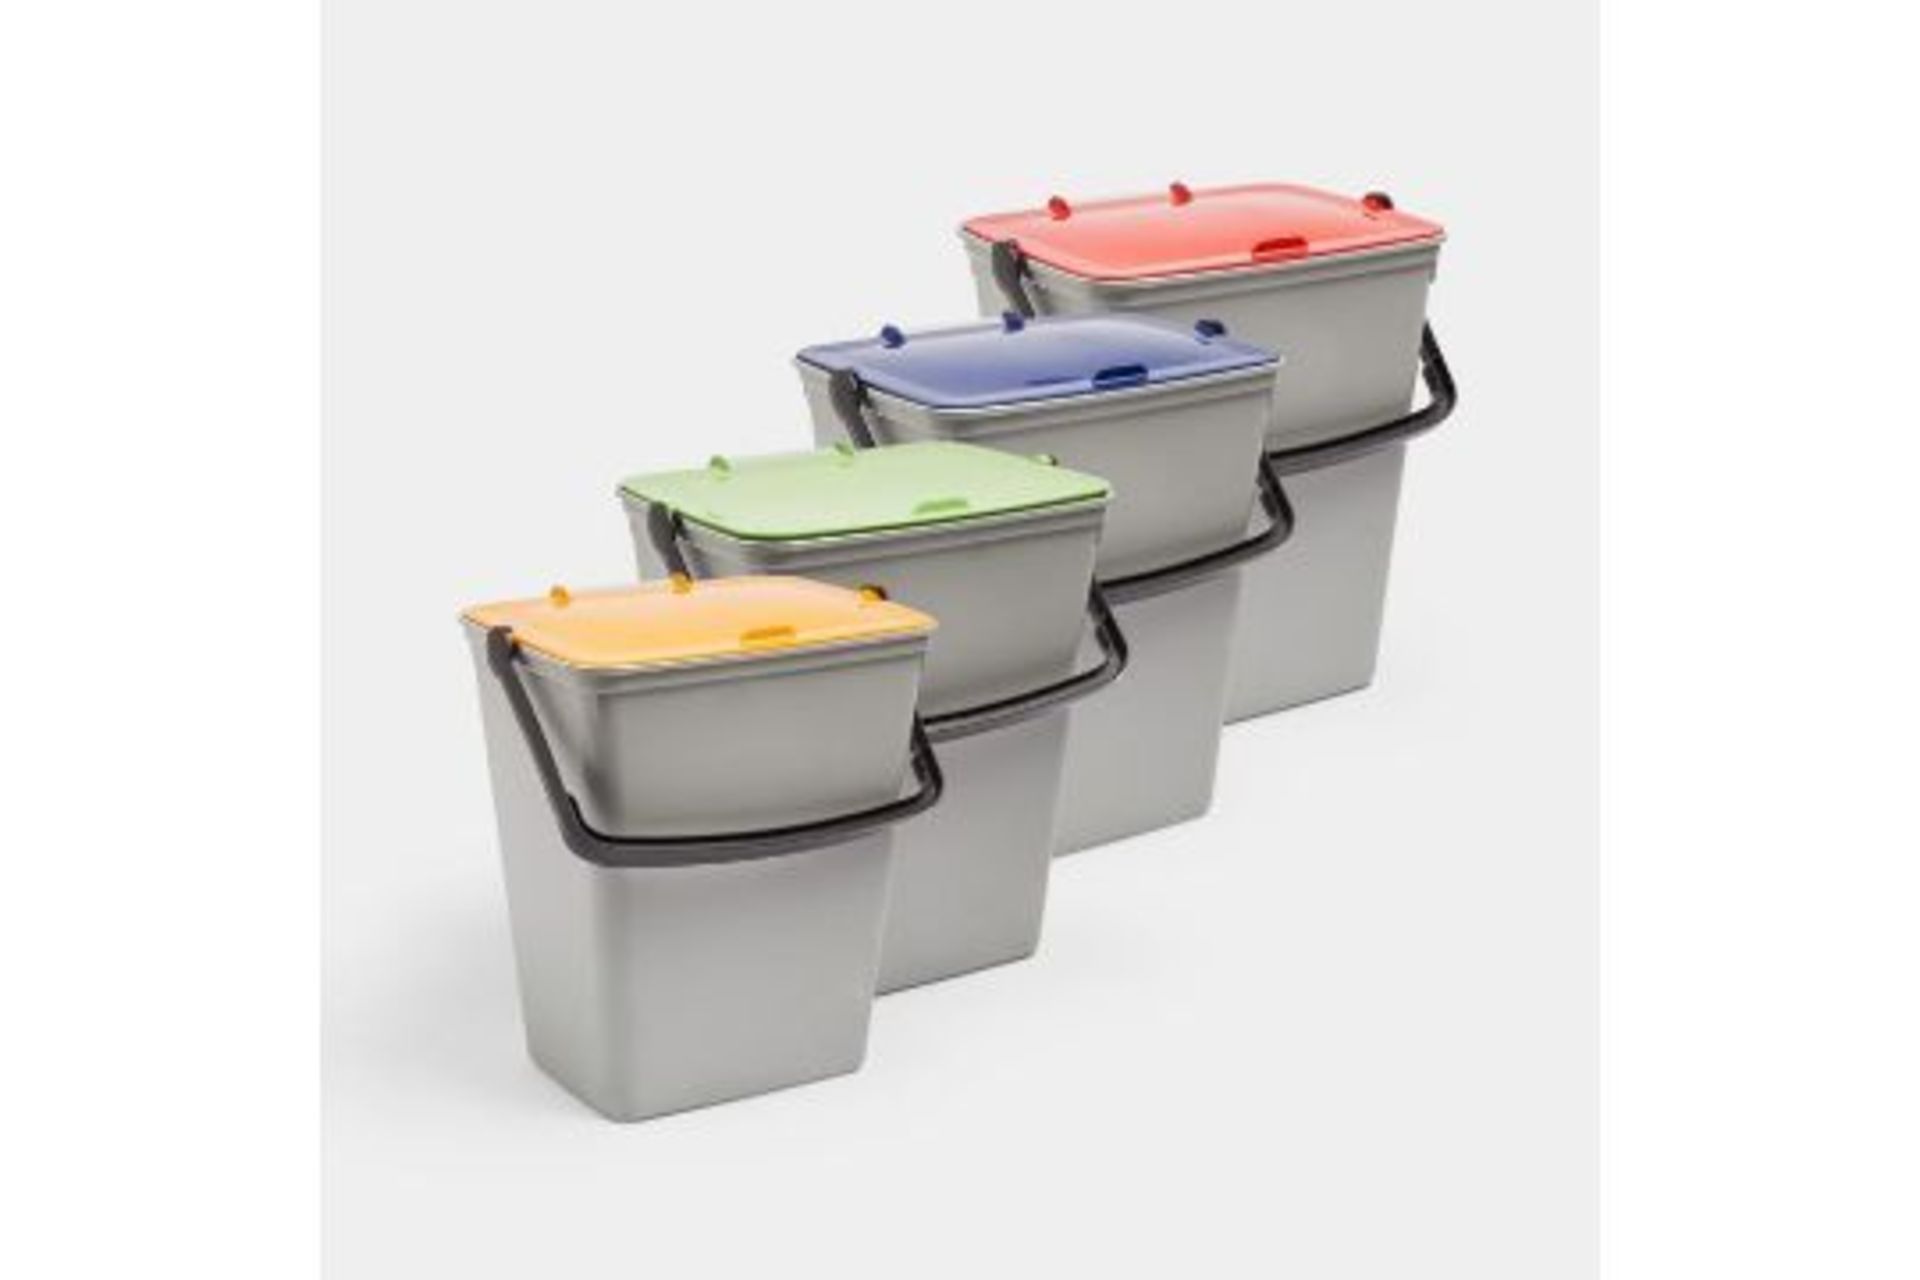 Set of 4 15L Bins. - PW. Cut the clutter and make recycling easier with this set of 4 bins. With